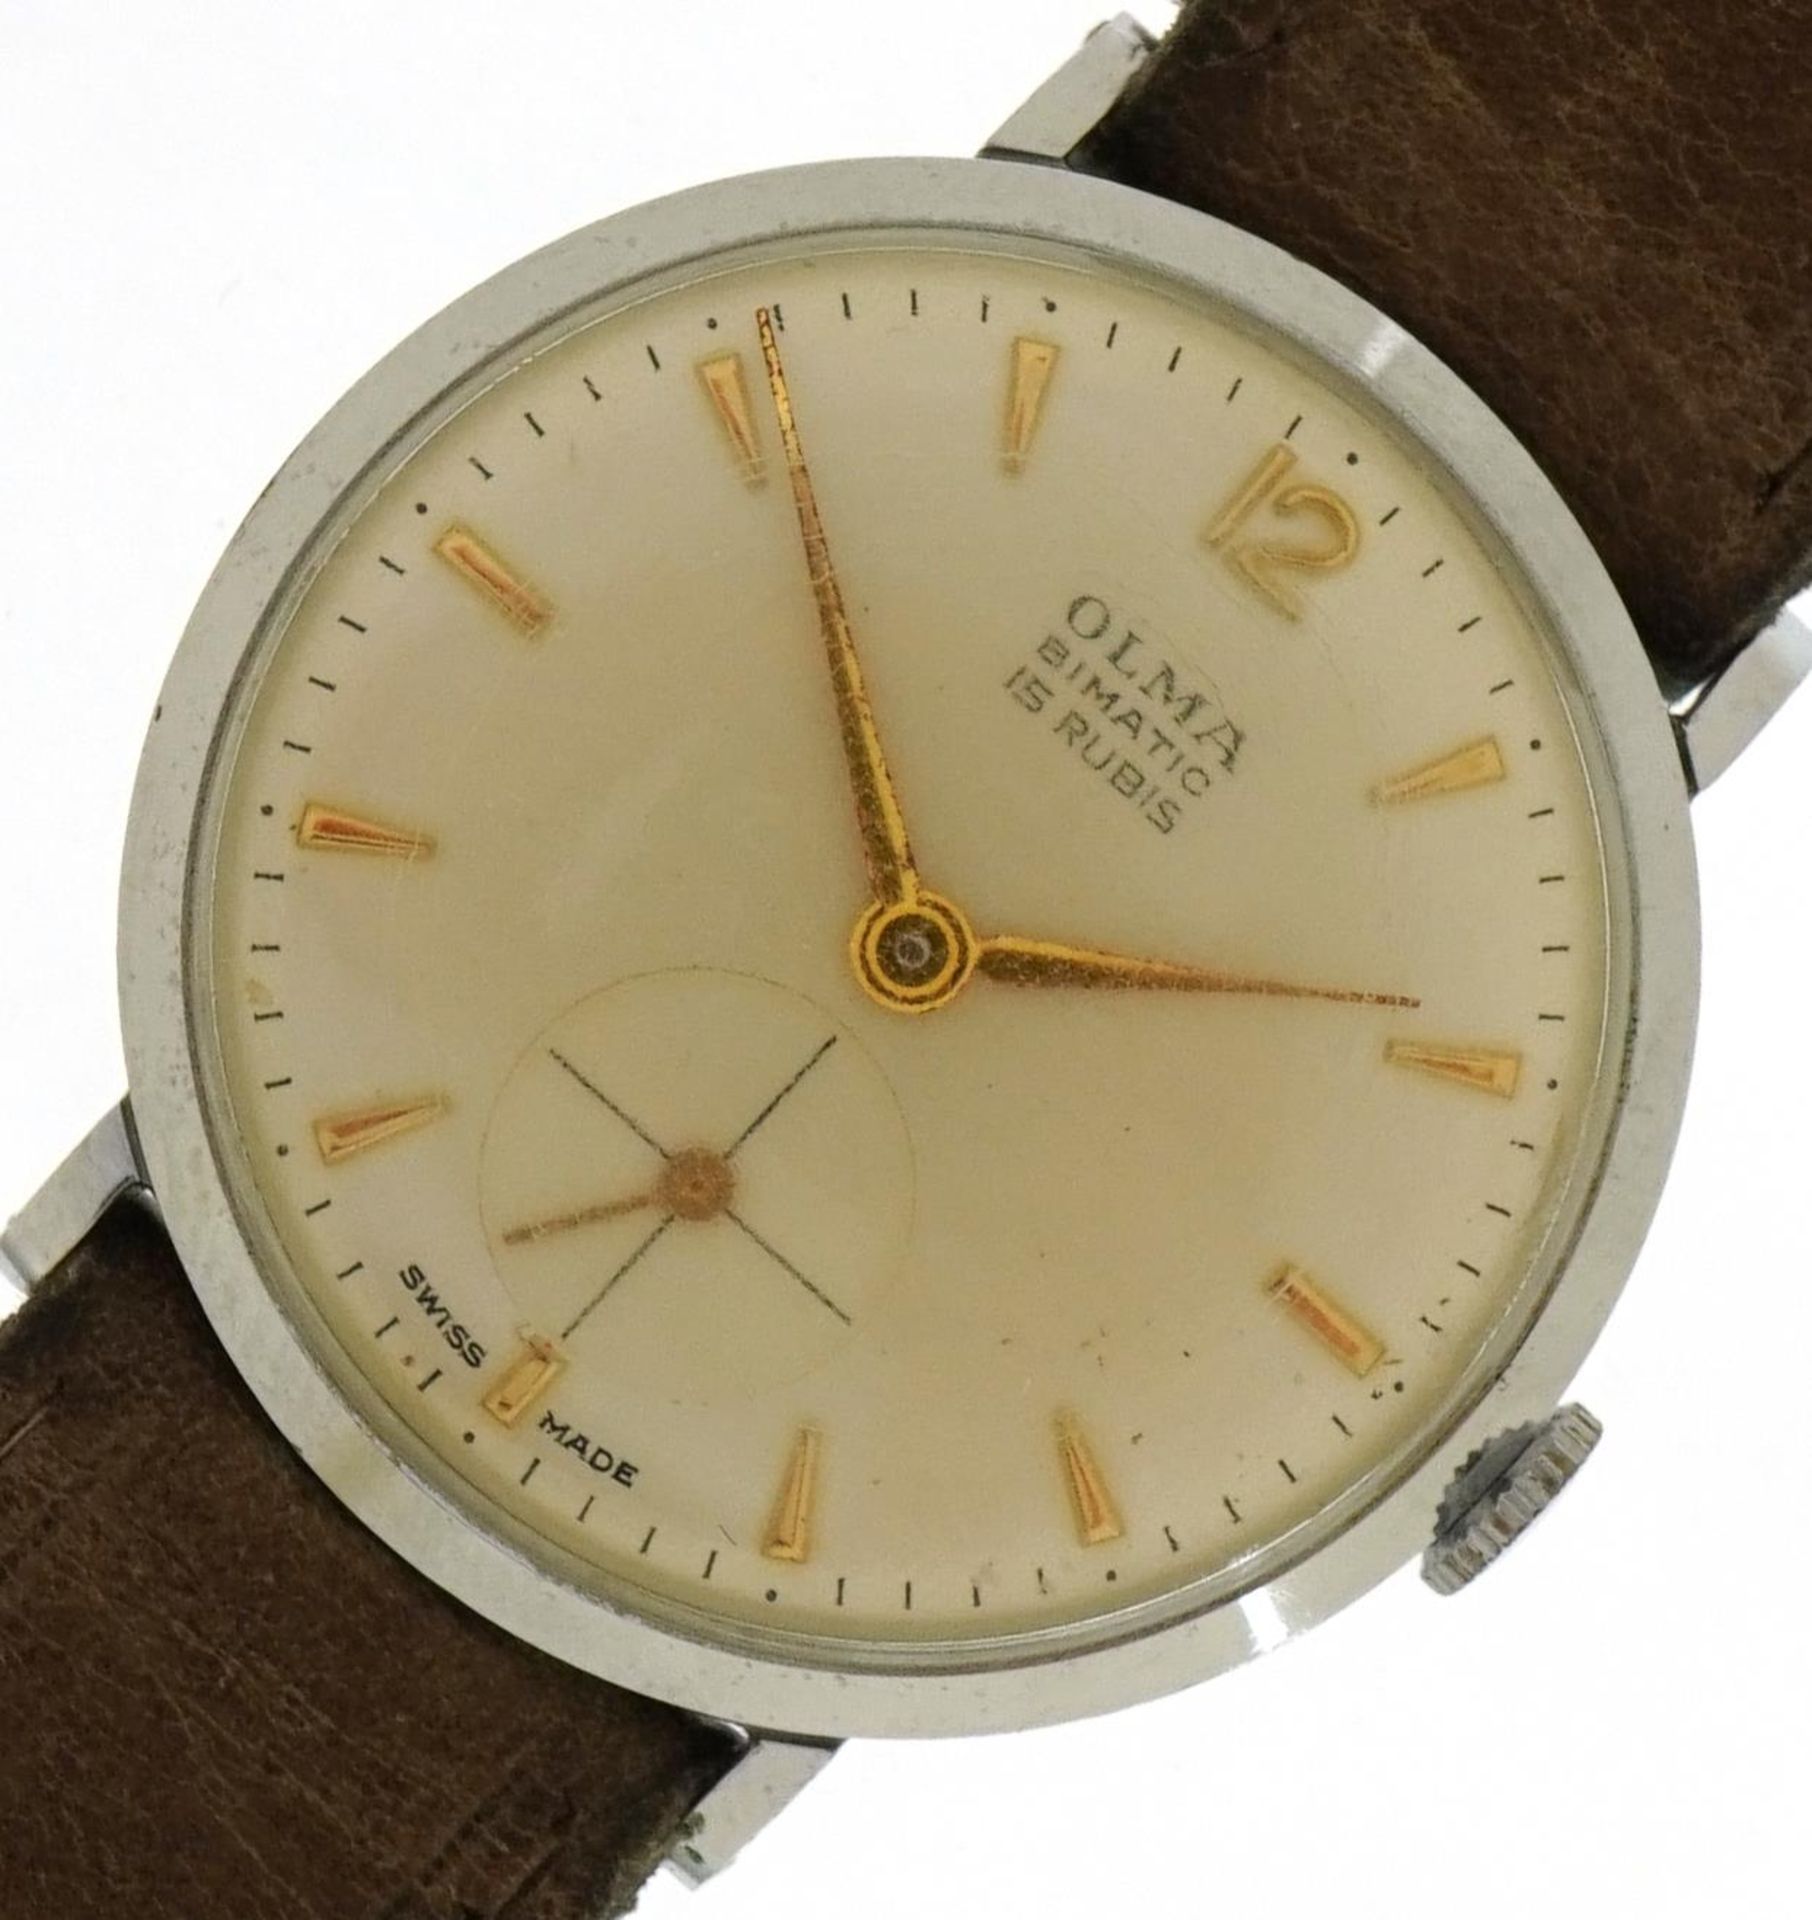 Olma, gentlemen's Olma Bimatic manual wristwatch with subsidiary dial, the case numbered 4354, 31.